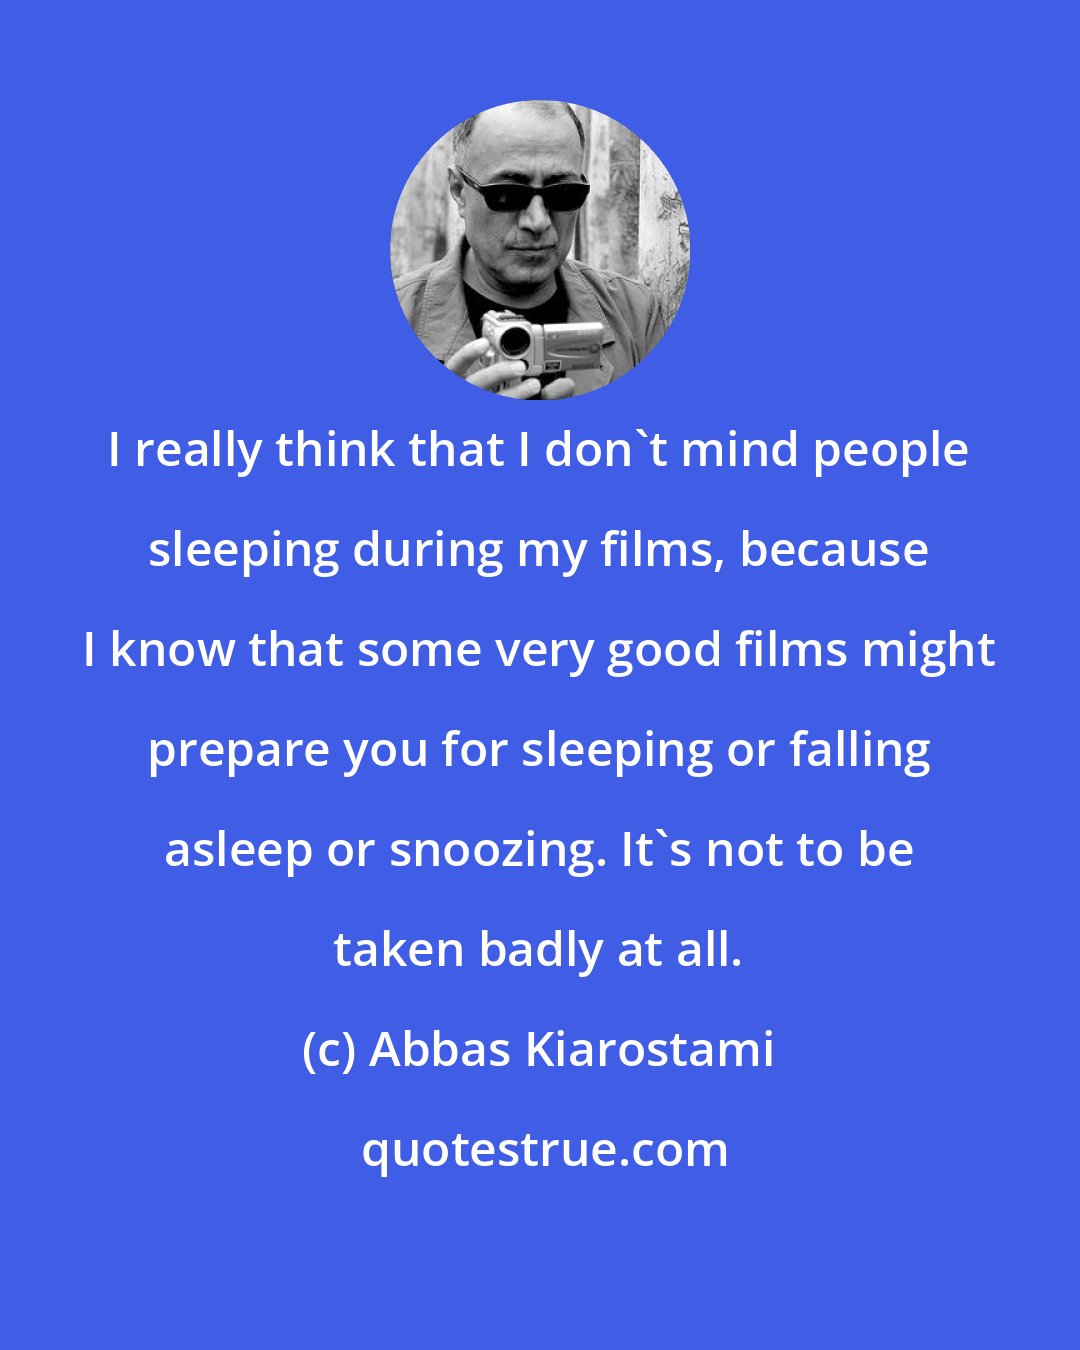 Abbas Kiarostami: I really think that I don't mind people sleeping during my films, because I know that some very good films might prepare you for sleeping or falling asleep or snoozing. It's not to be taken badly at all.